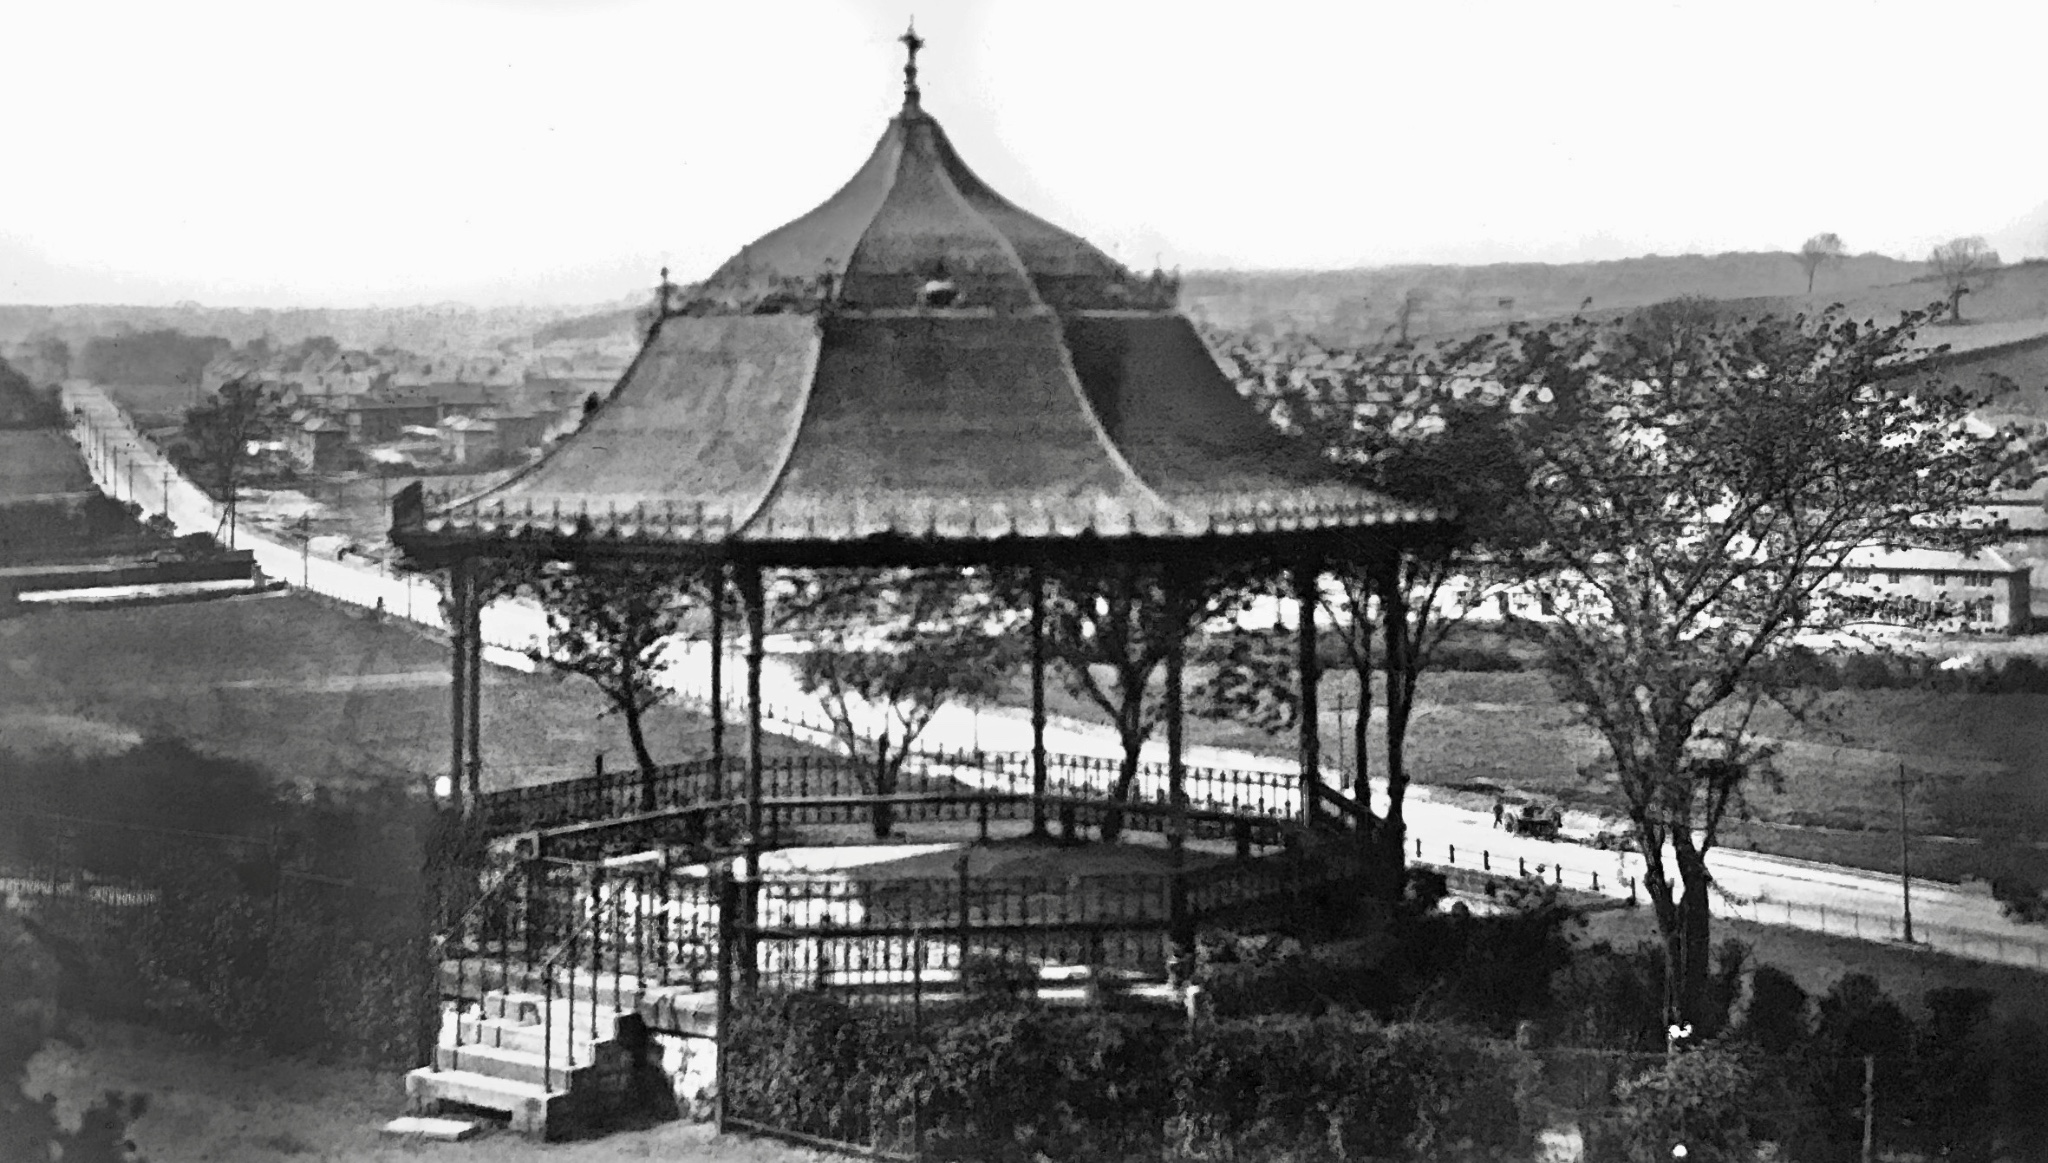 Bandstand and New Farm Hill Estate, from Woodhouse Ridge, 1930s